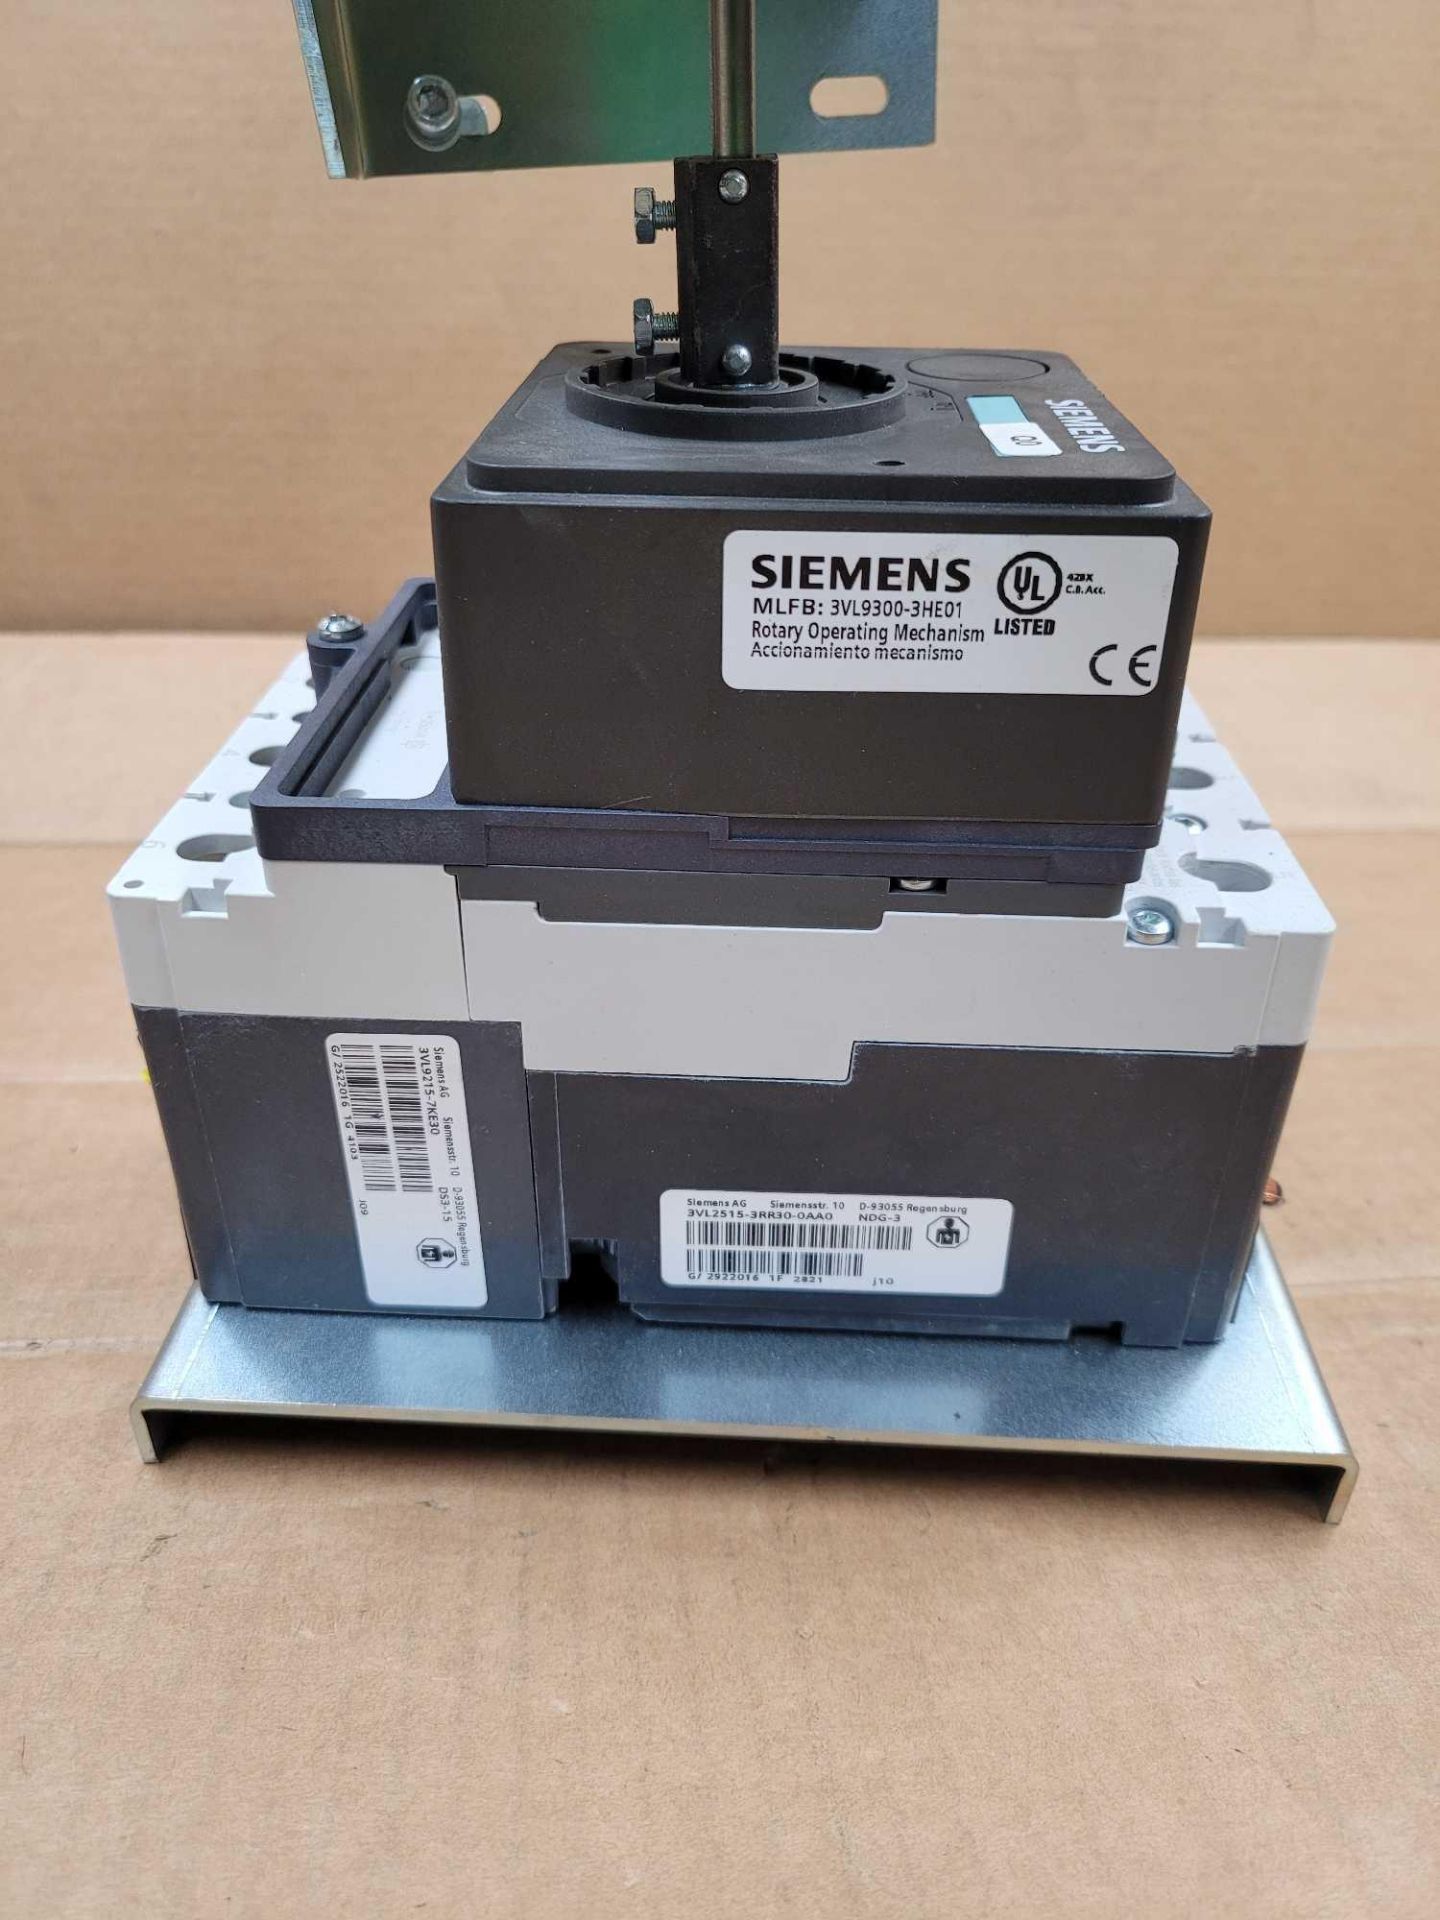 SIEMENS HDR3S150L with 3VL9300-3HE01 and SCA 90002.919005 / 150 Amp Circuit Breaker with Rotary Oper - Bild 4 aus 9